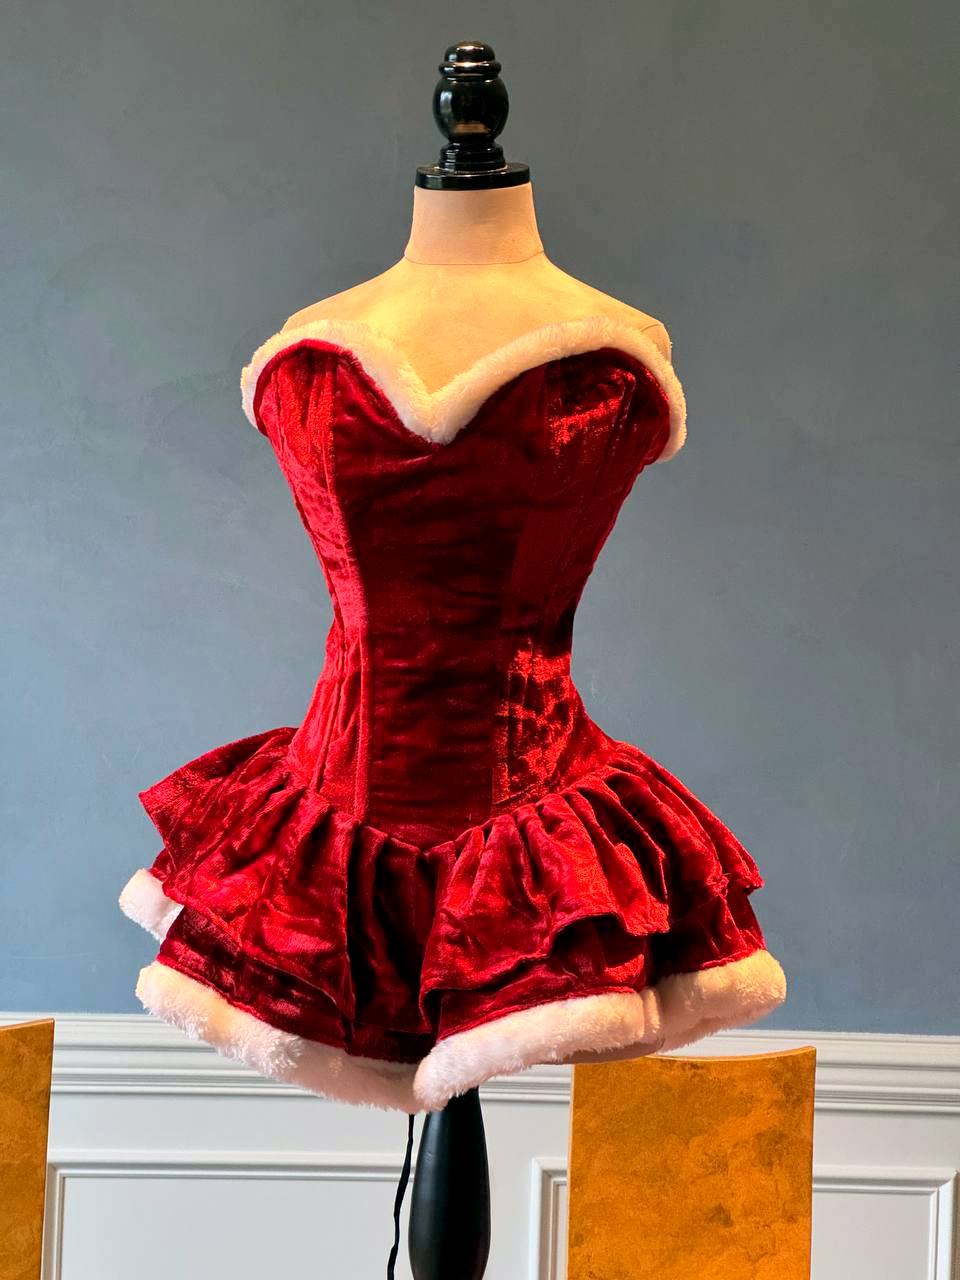 Authentic Santa corset dress with fluffy skirt, red Christmas